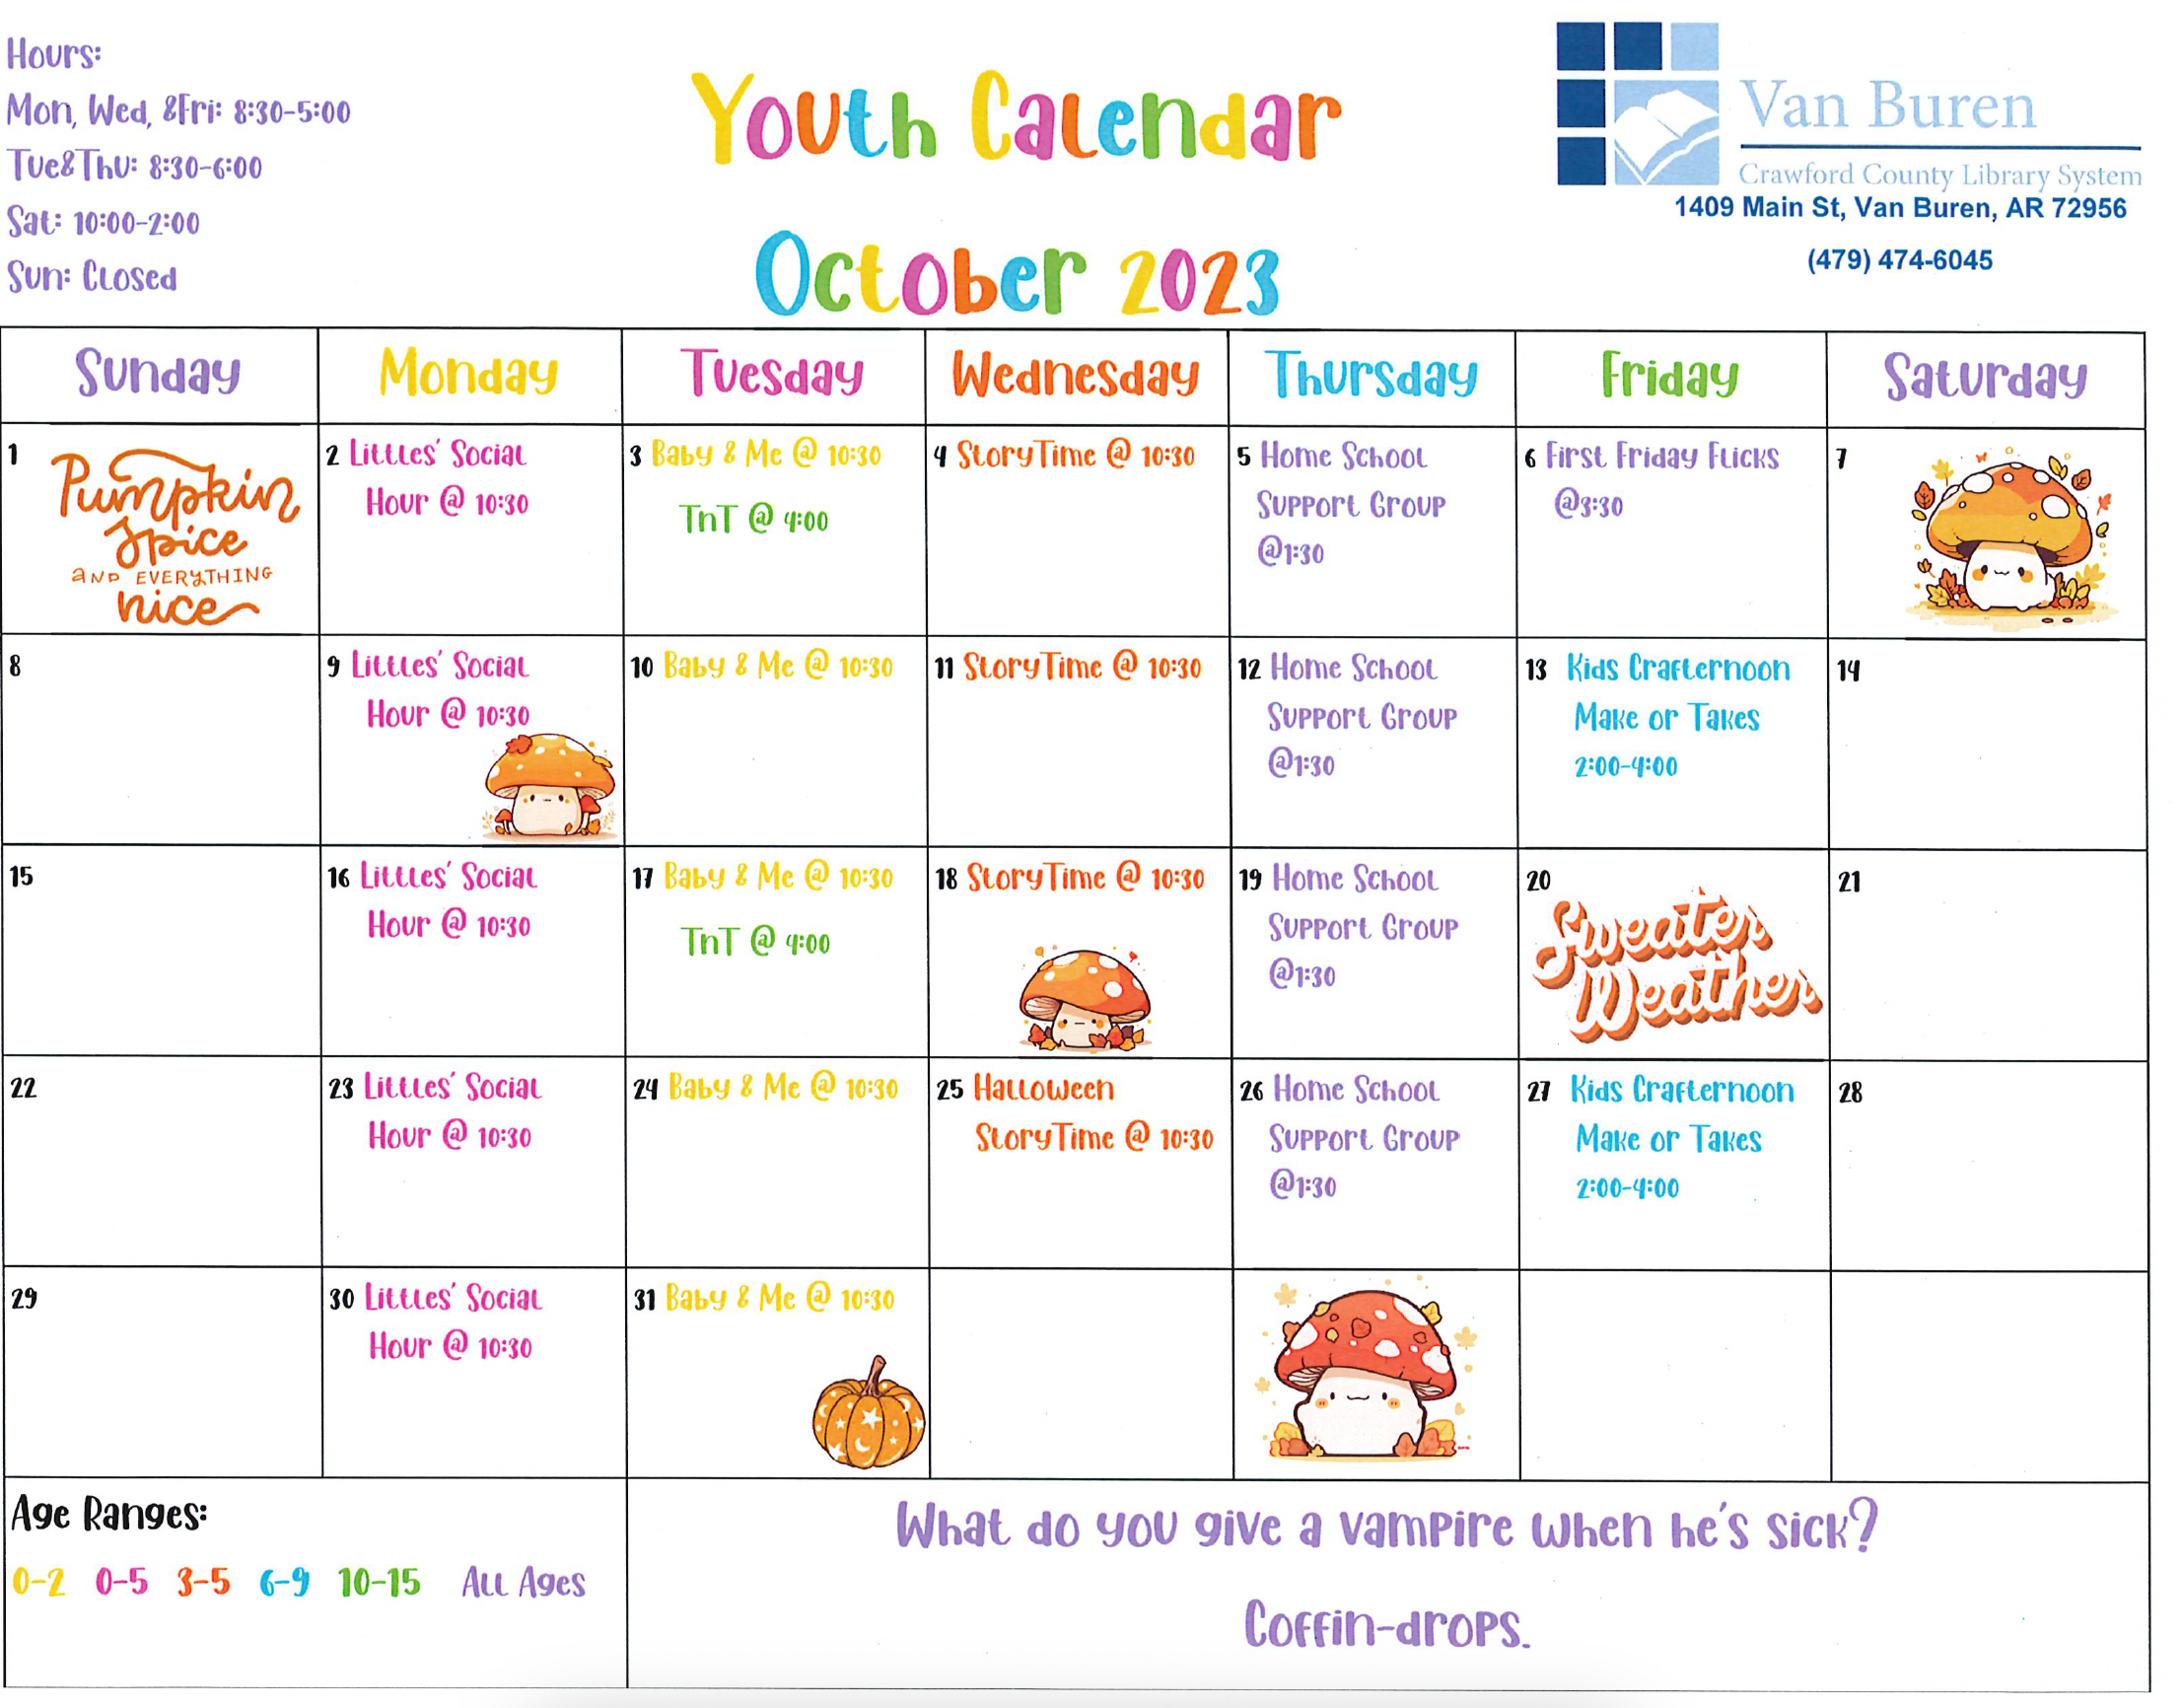 Crawford County Library System Announces October Calendar